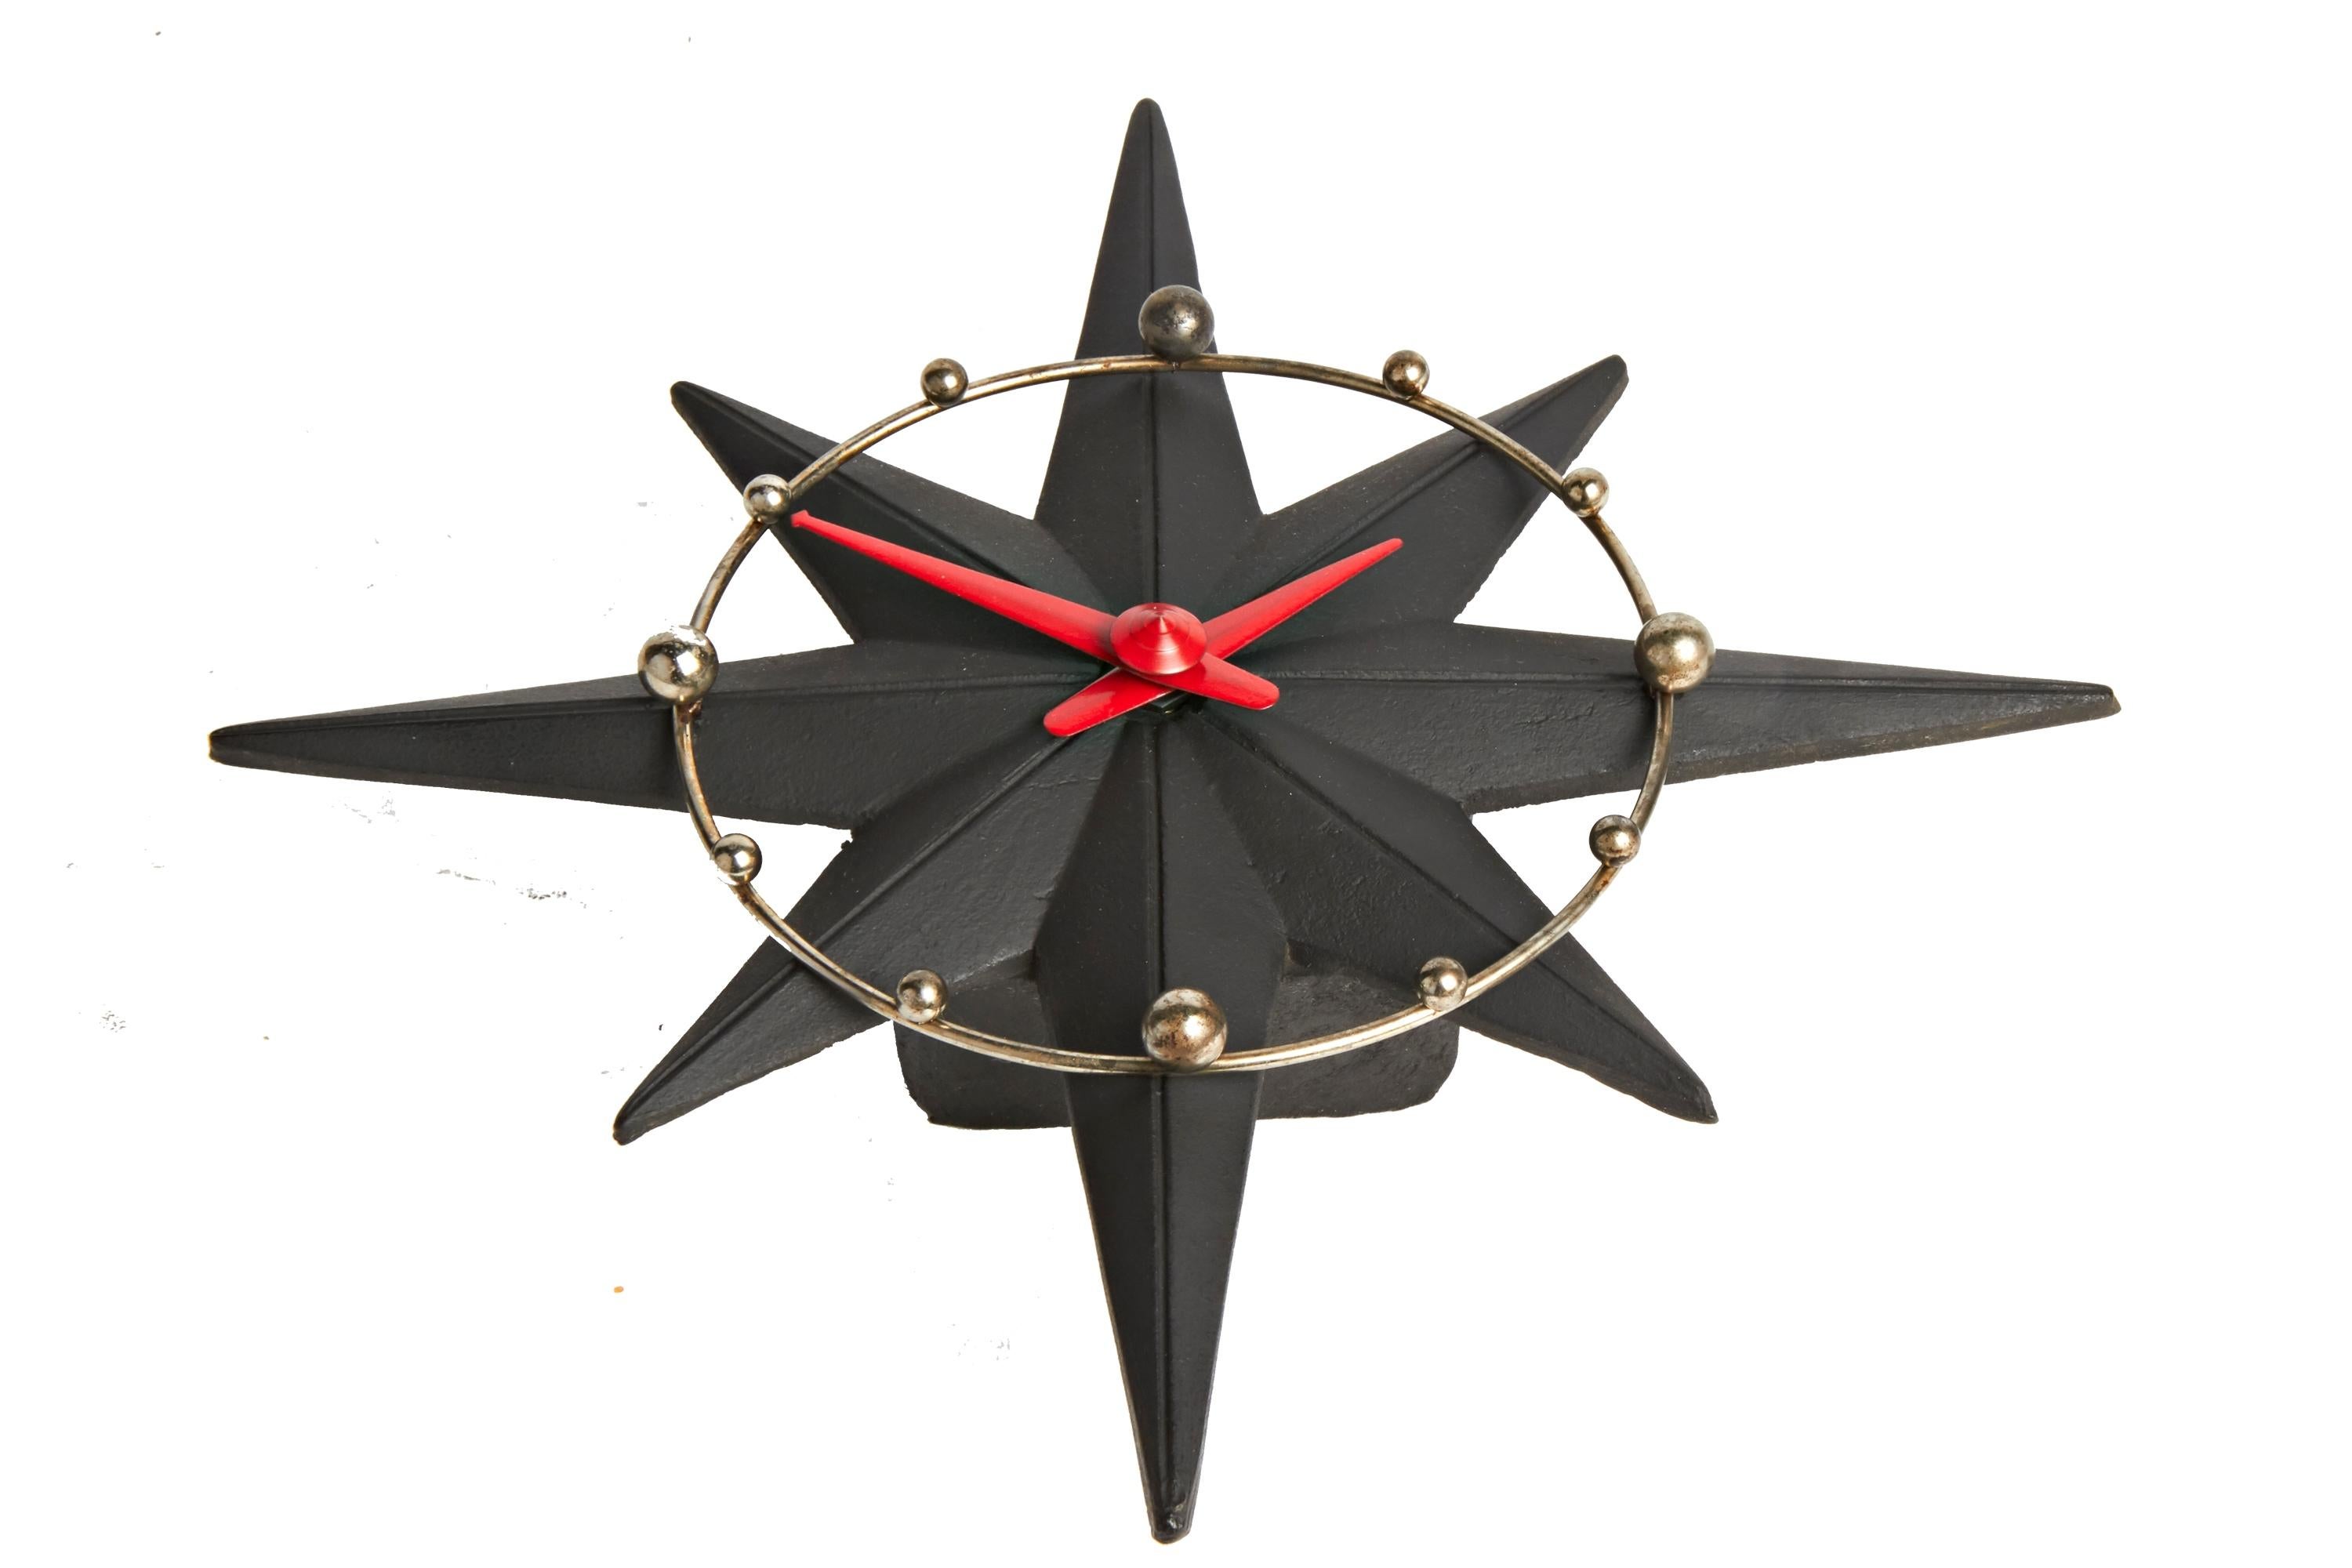 This beautifully designed American electric wall clock is the Model 106, Star-Flyte by Haddon Products of Chicago, Illinois. Its black painted, 8-point, compass star shaped body holds a chrome chapter ring that features chrome plated spherical